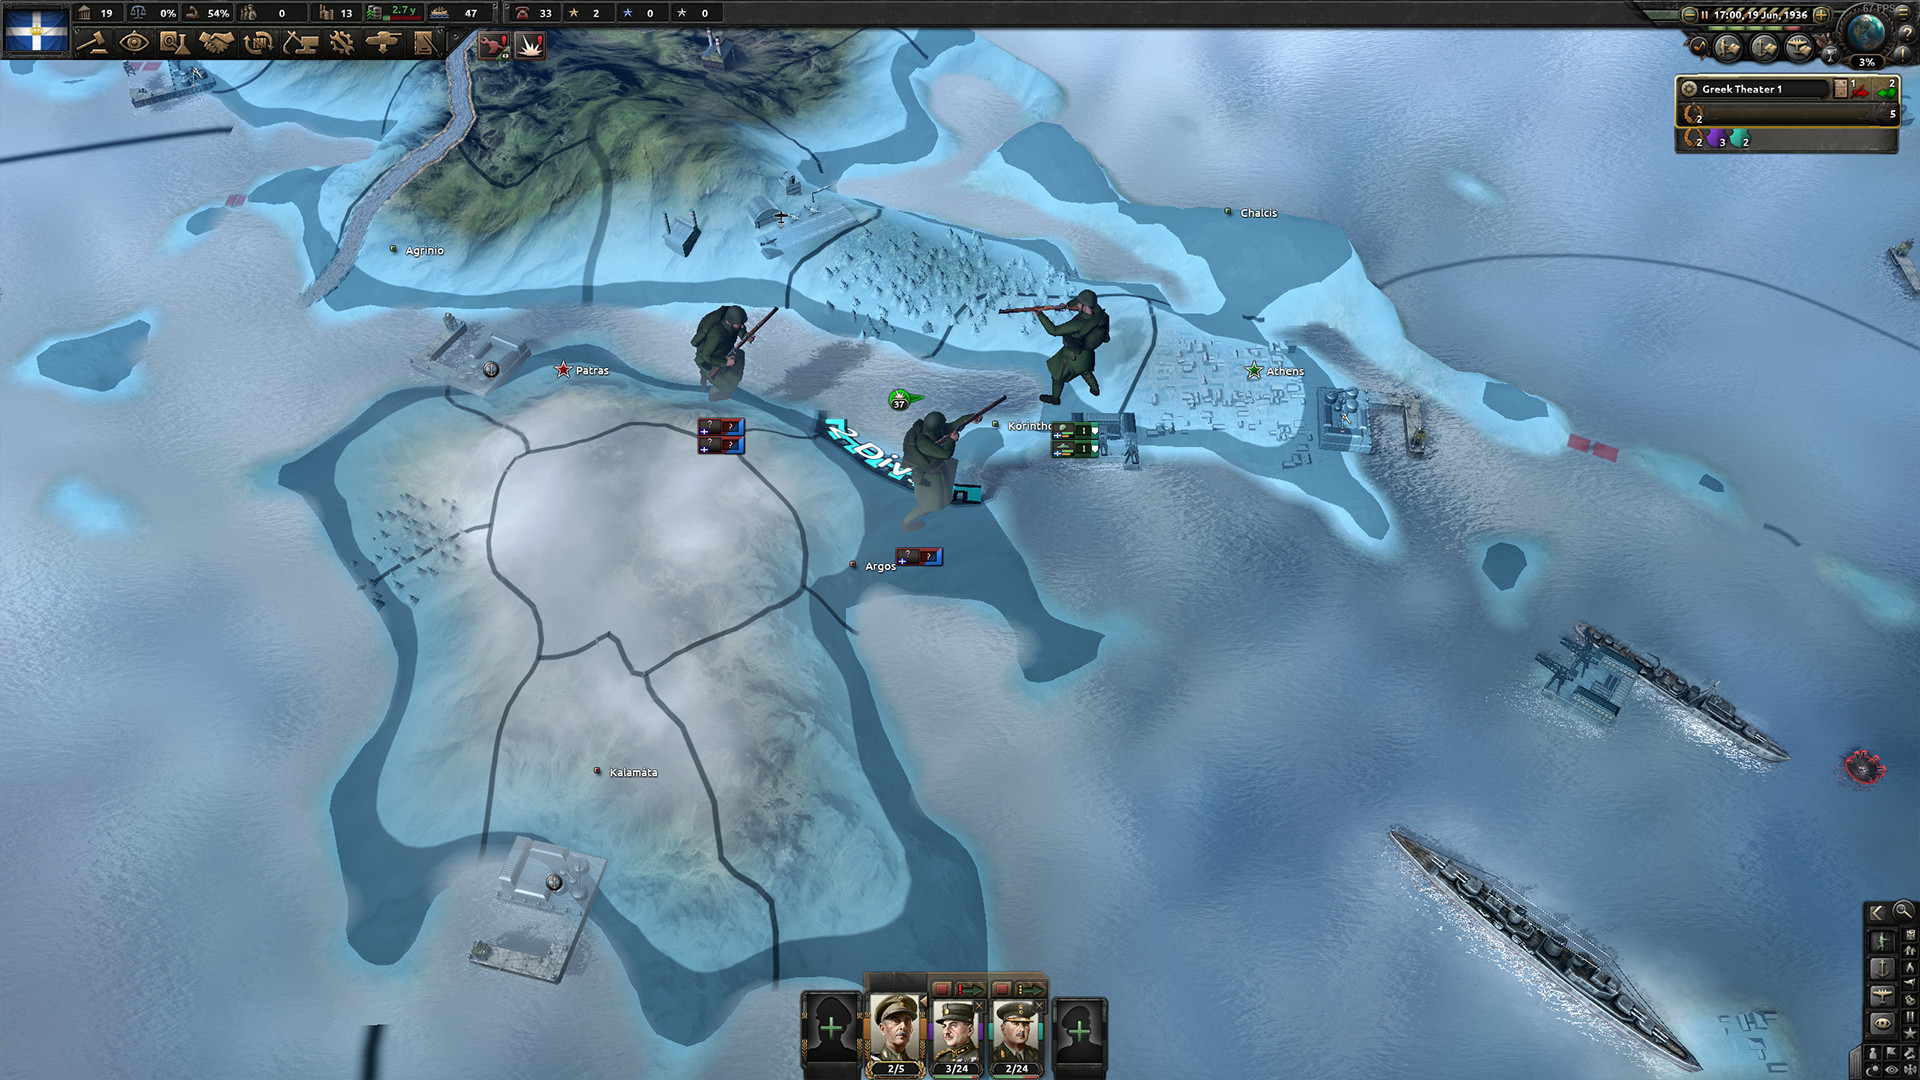 hearts of iron iv multiplayer